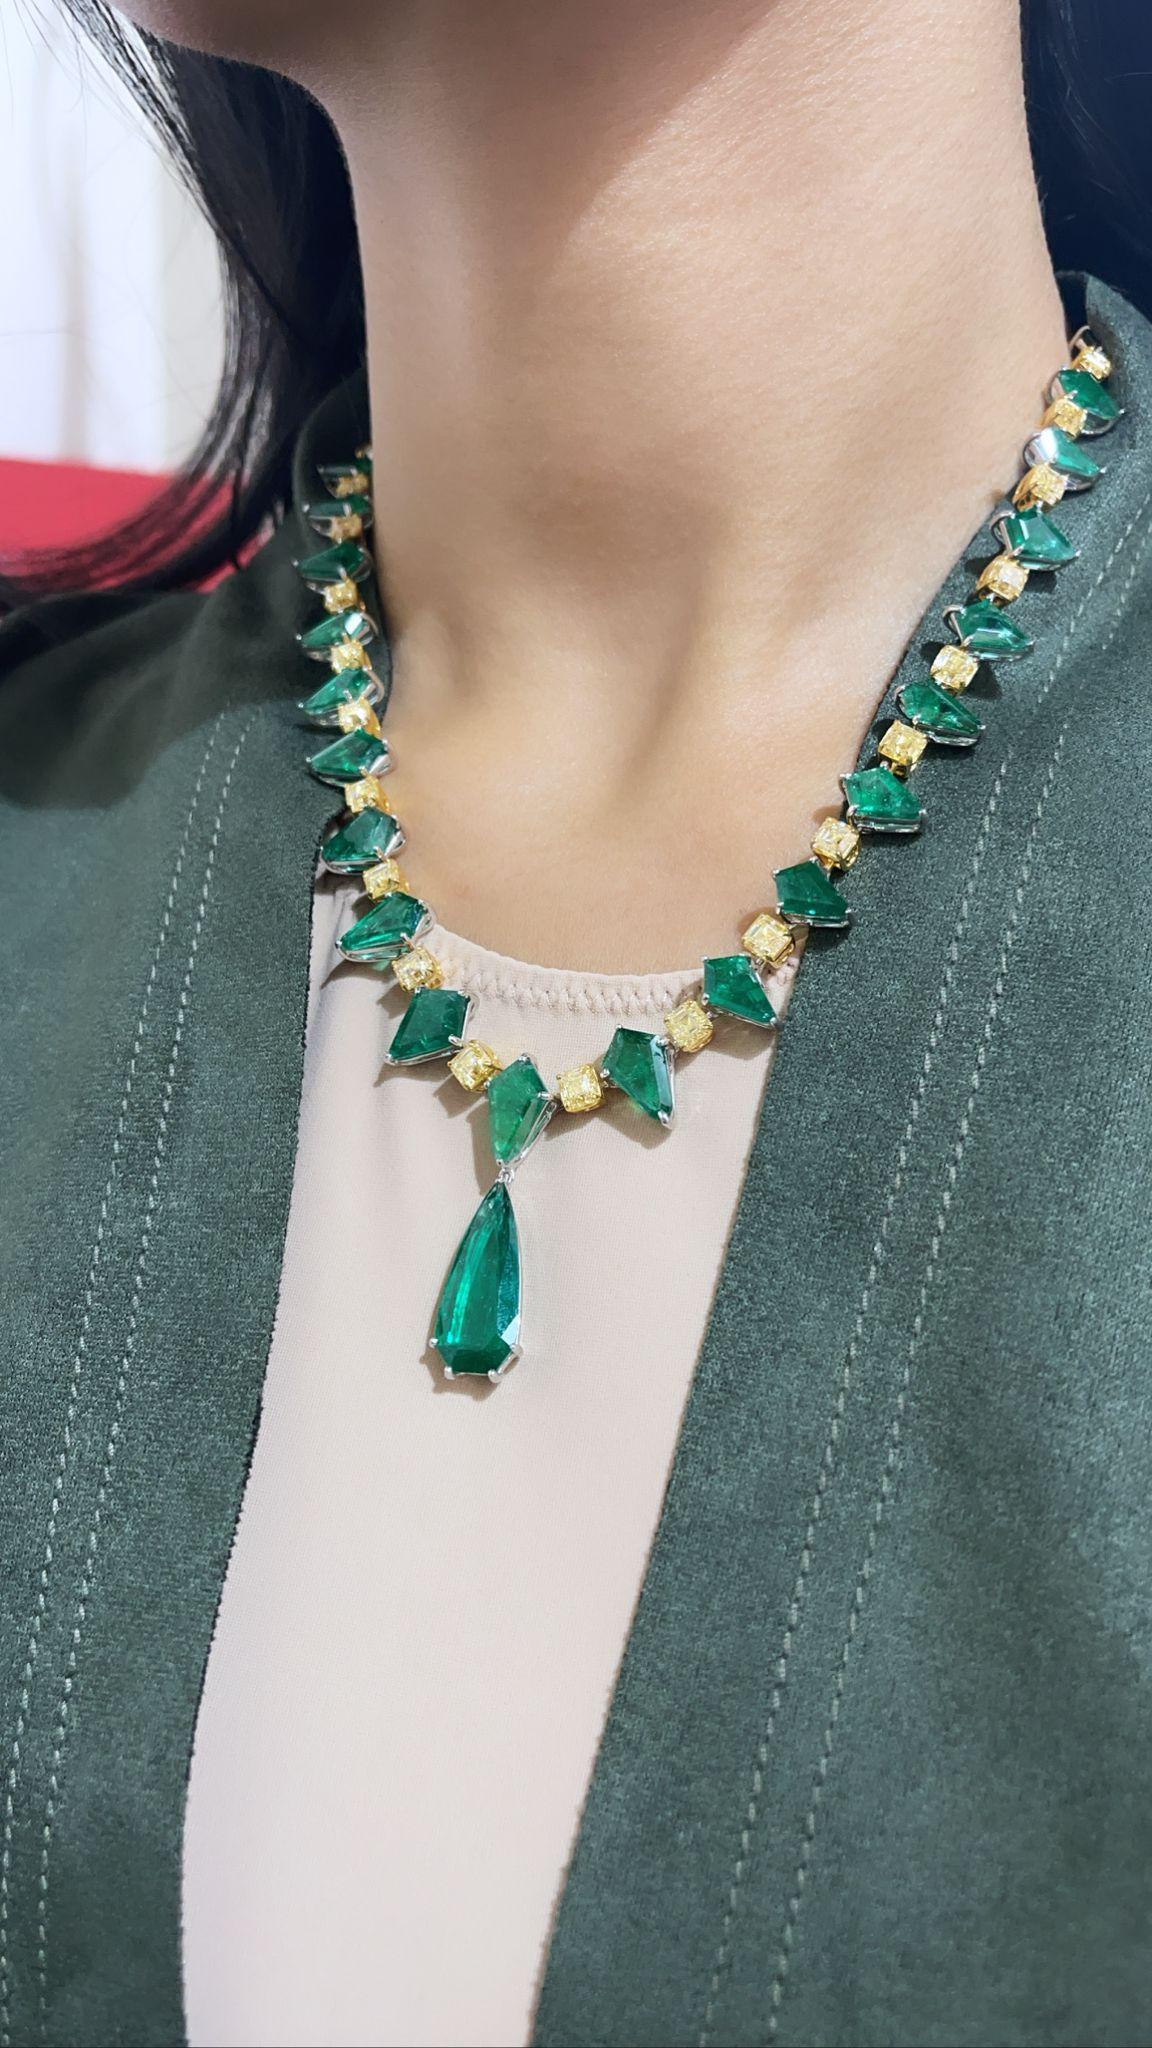 Specially Curated piece of graduating 33.74 Carats  of Kite shape Zambian Emeralds and 18.38 Carats Yellow Cushion Diamonds with a 6.94 Carat Zambian Emerald Pear shape drop! Made with 43.70 grams of 18K Yellow Gold. This piece was crafted by highly